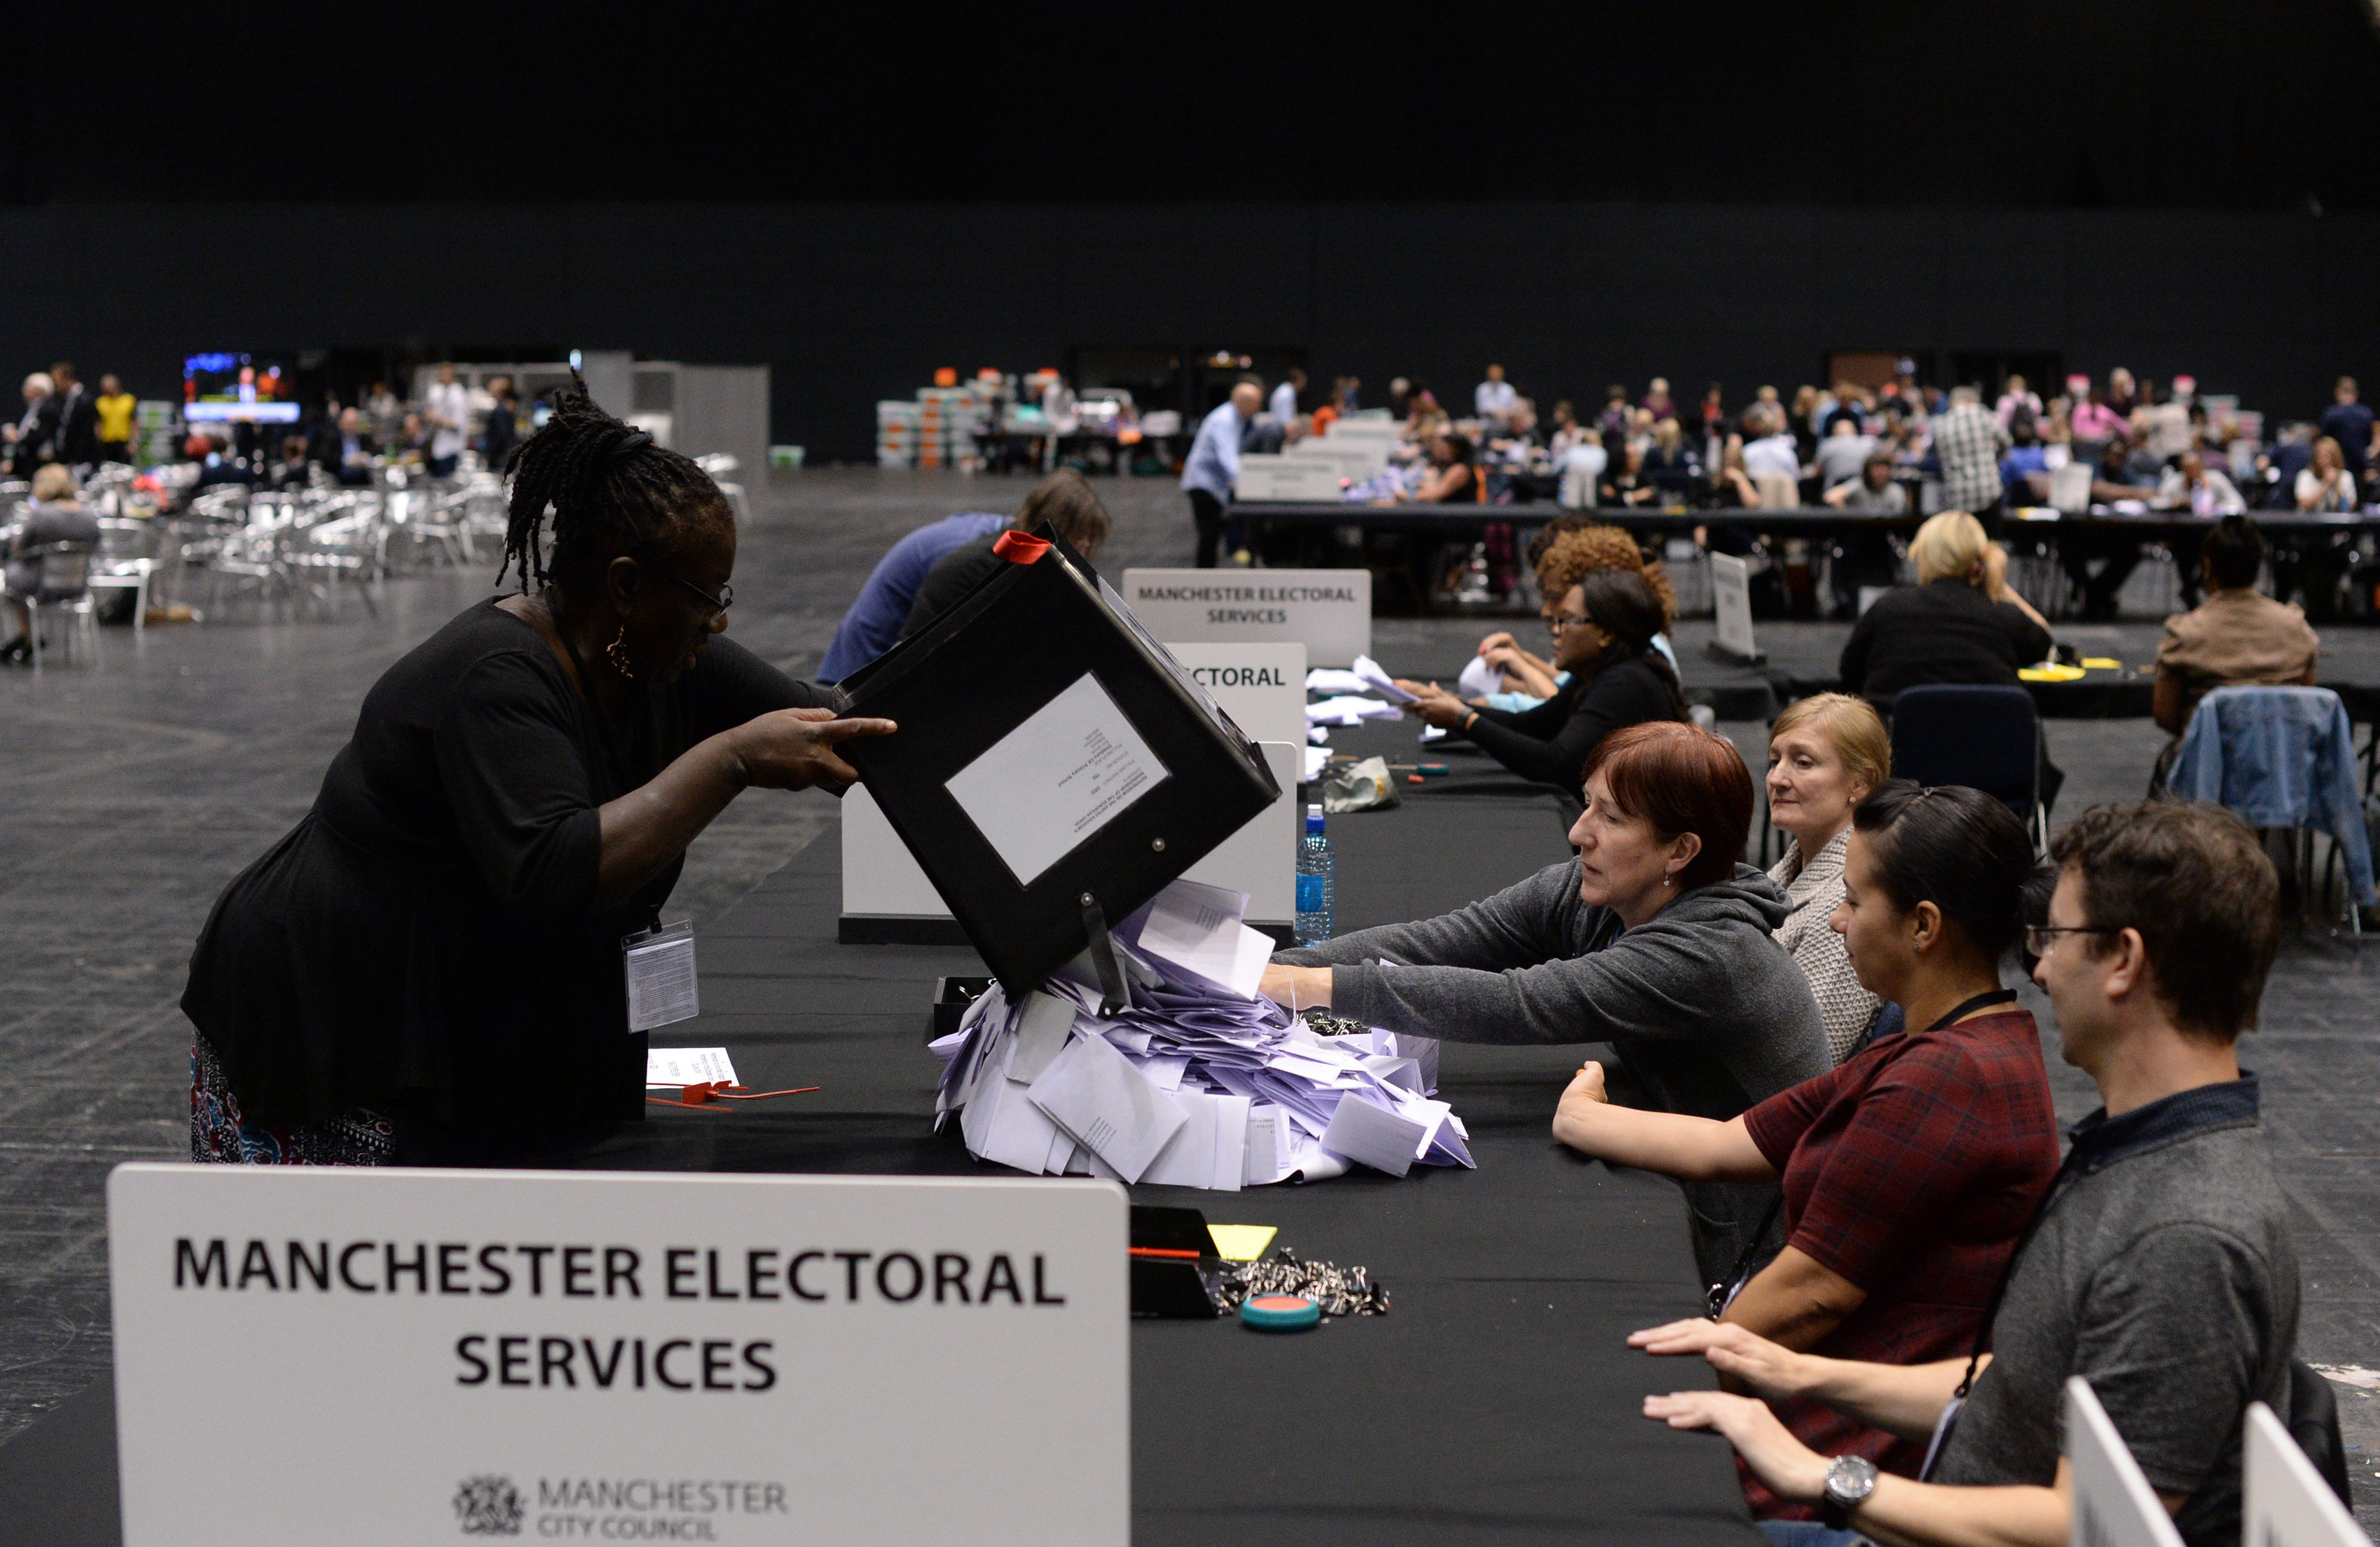 Election workers in the United Kingdom counting ballots following the country's vote on EU membership, June 24, 2015